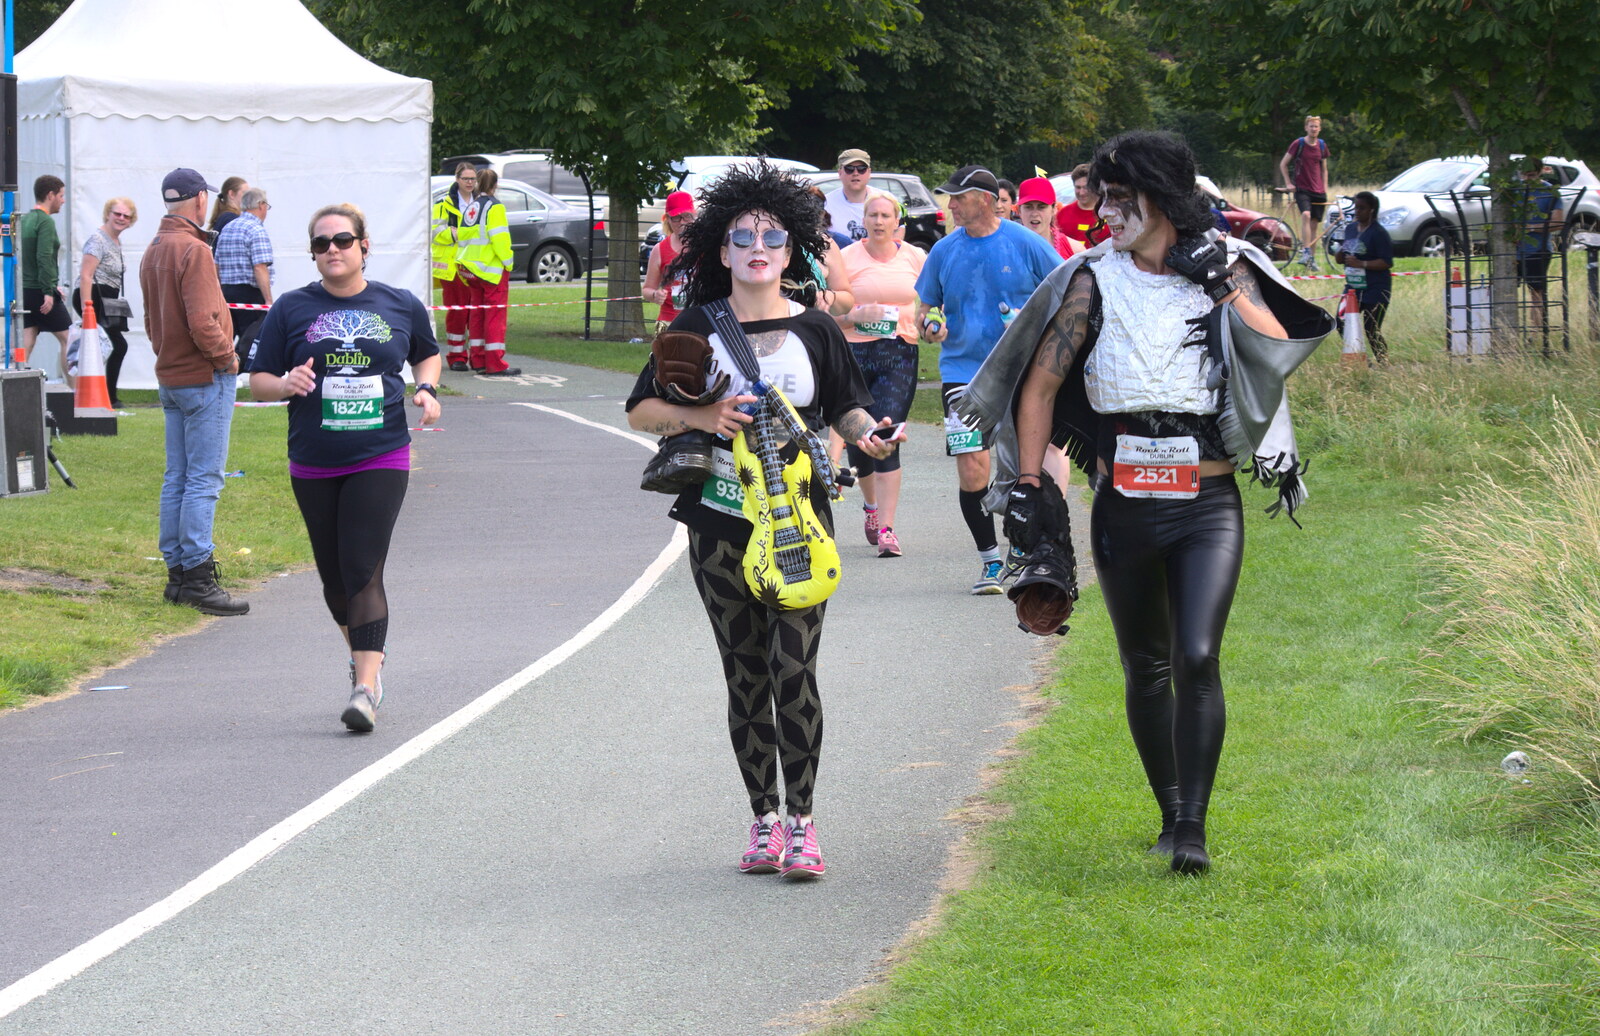 There are a few people in fancy dress from Isobel's Rock'n'Roll Half Marathon, Dublin, Ireland - 13th August 2017